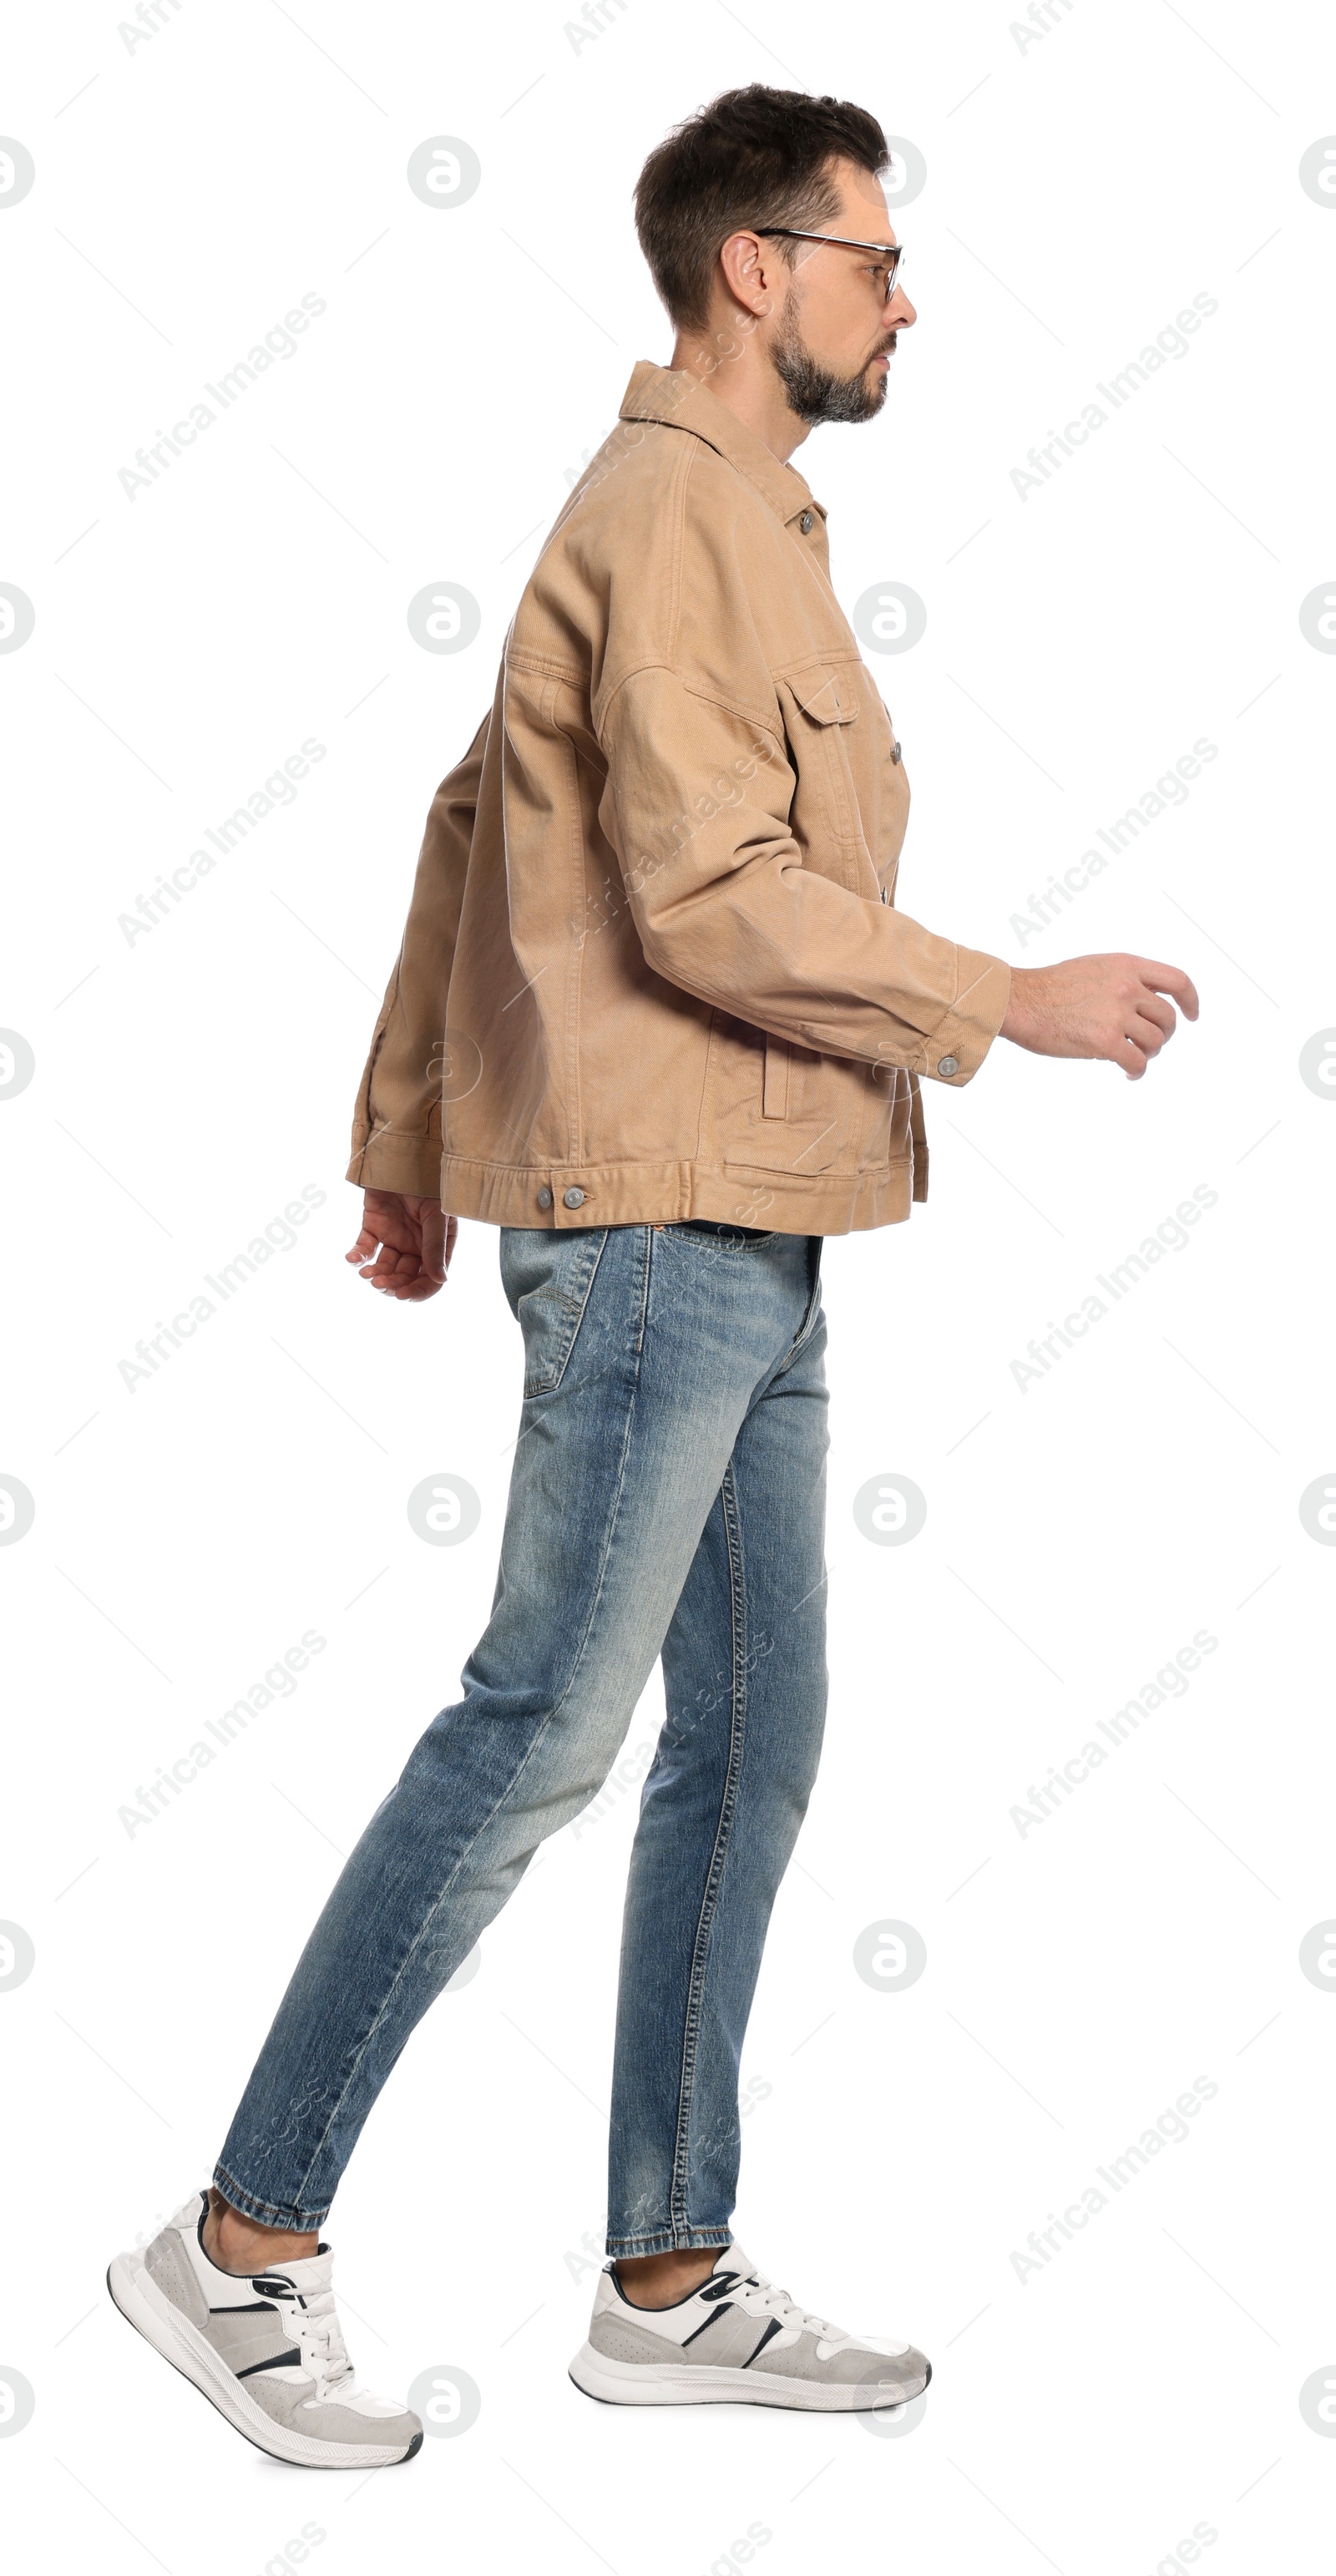 Photo of Man in stylish outfit walking on white background